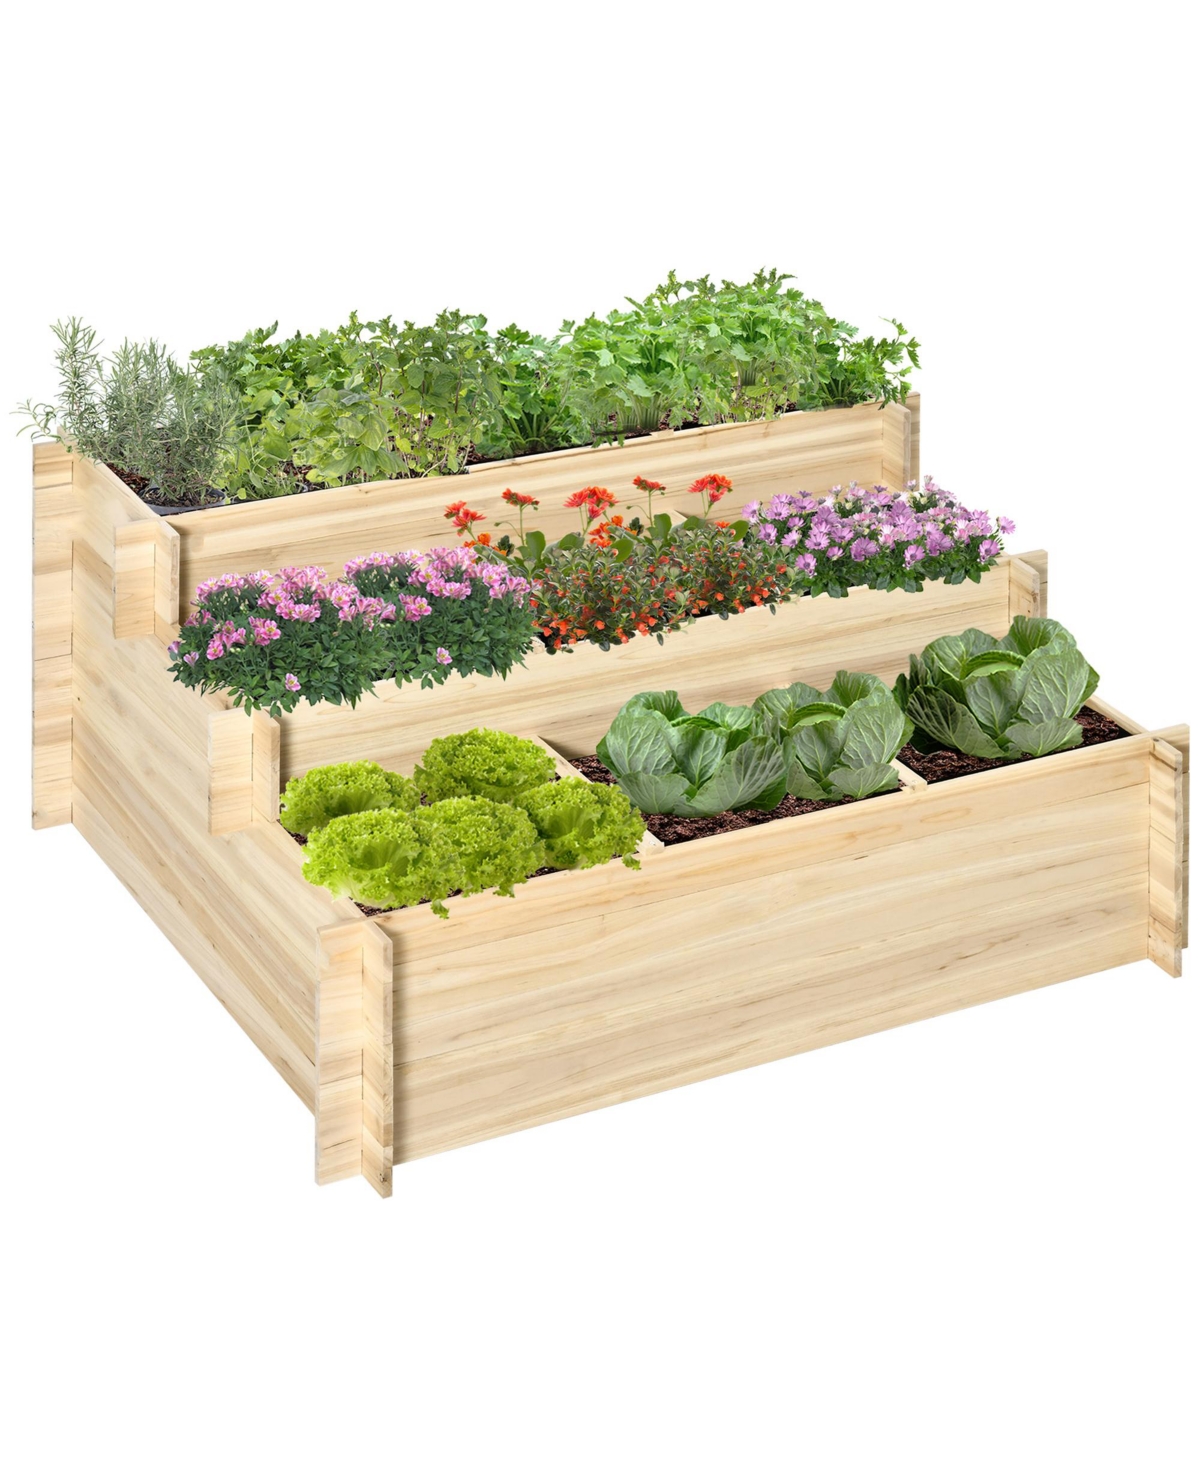 3 Tier Raised Garden Bed Elevated Planter Flower Box with 9 Grow Grids and Non-woven Fabric for Vegetables, Flower, Herb Outdoor Indoor Use -